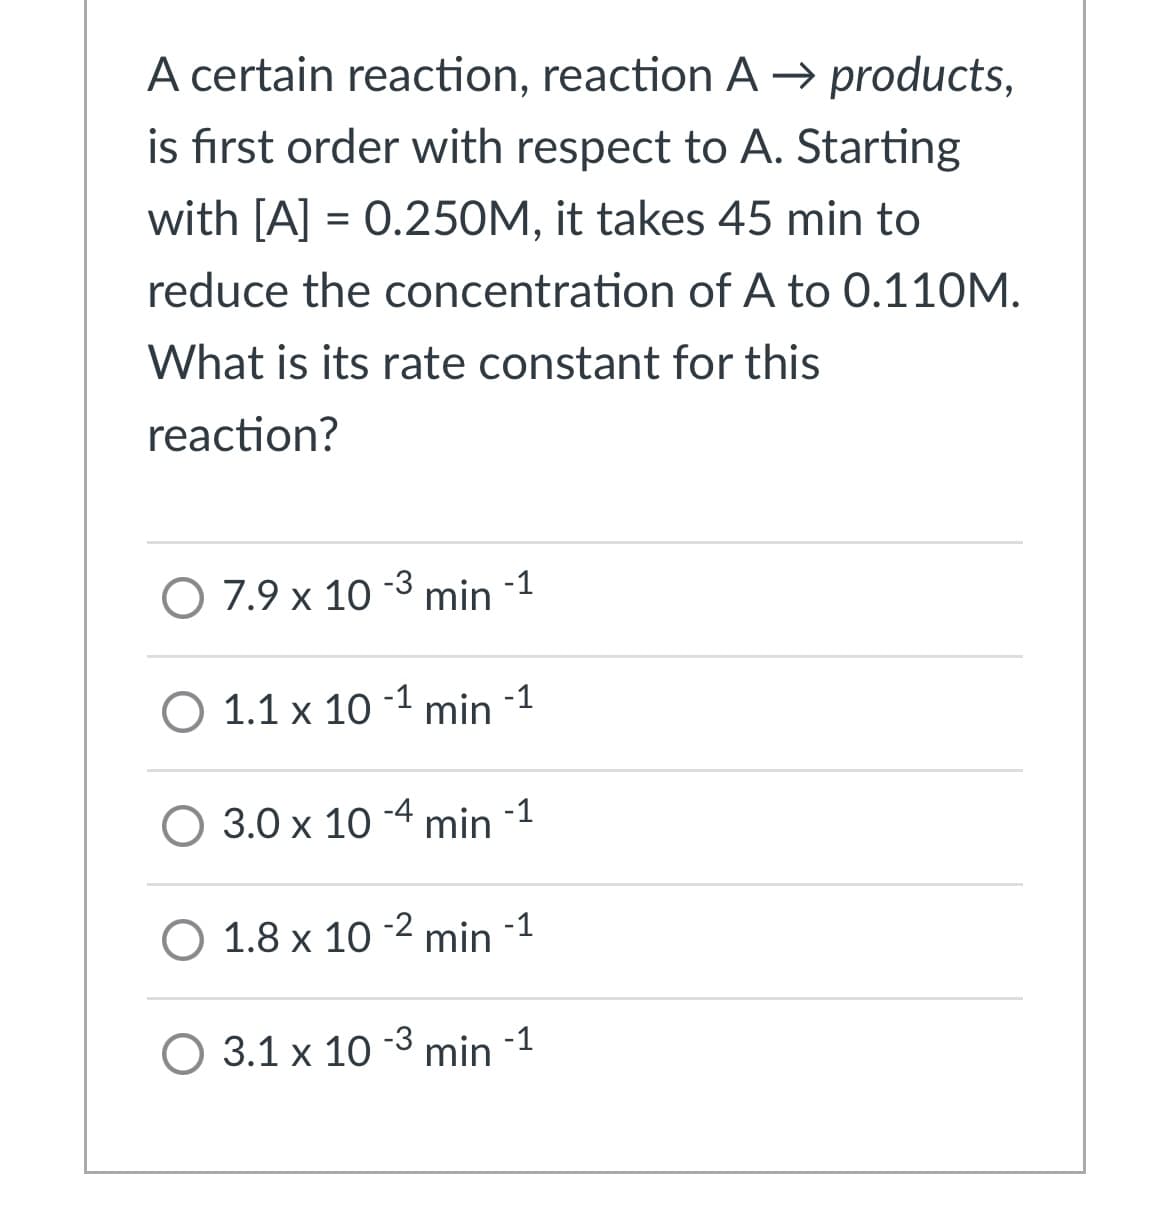 A certain reaction, reaction A → products,
is first order with respect to A. Starting
with [A] = 0.250M, it takes 45 min to
reduce the concentration of A to 0.110M.
What is its rate constant for this
reaction?
O 7.9 x 10 -3 min -1
-1
-1
0 1.1х 10
min
O 3.0 x 10 -4 min -1
-1
O 1.8 x 10 2 min
O 3.1 x 10 3 min -1
